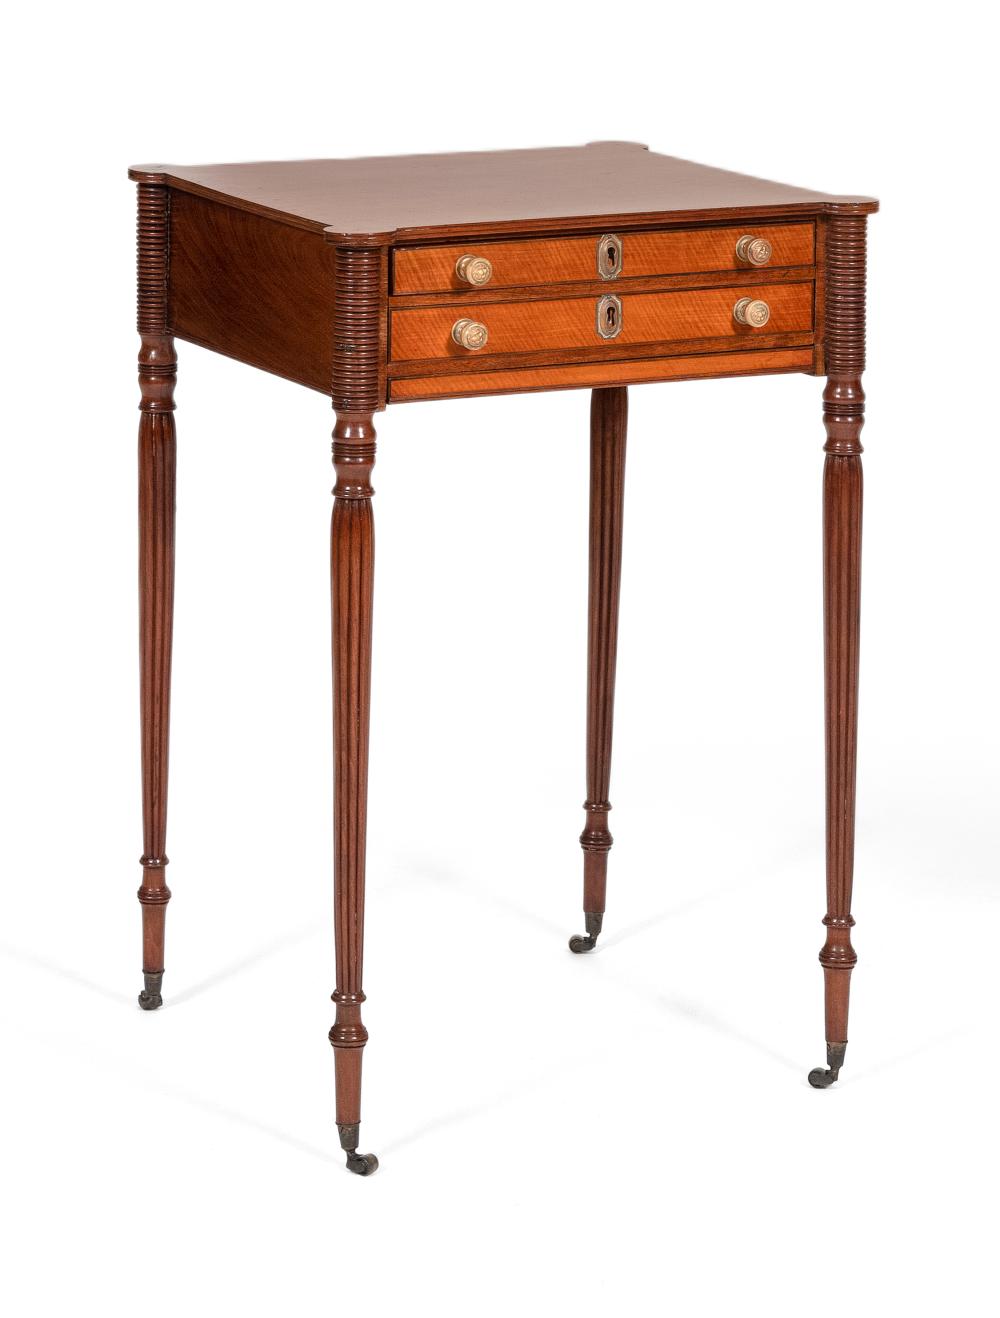 SHERATON TWO-DRAWER SEWING STAND